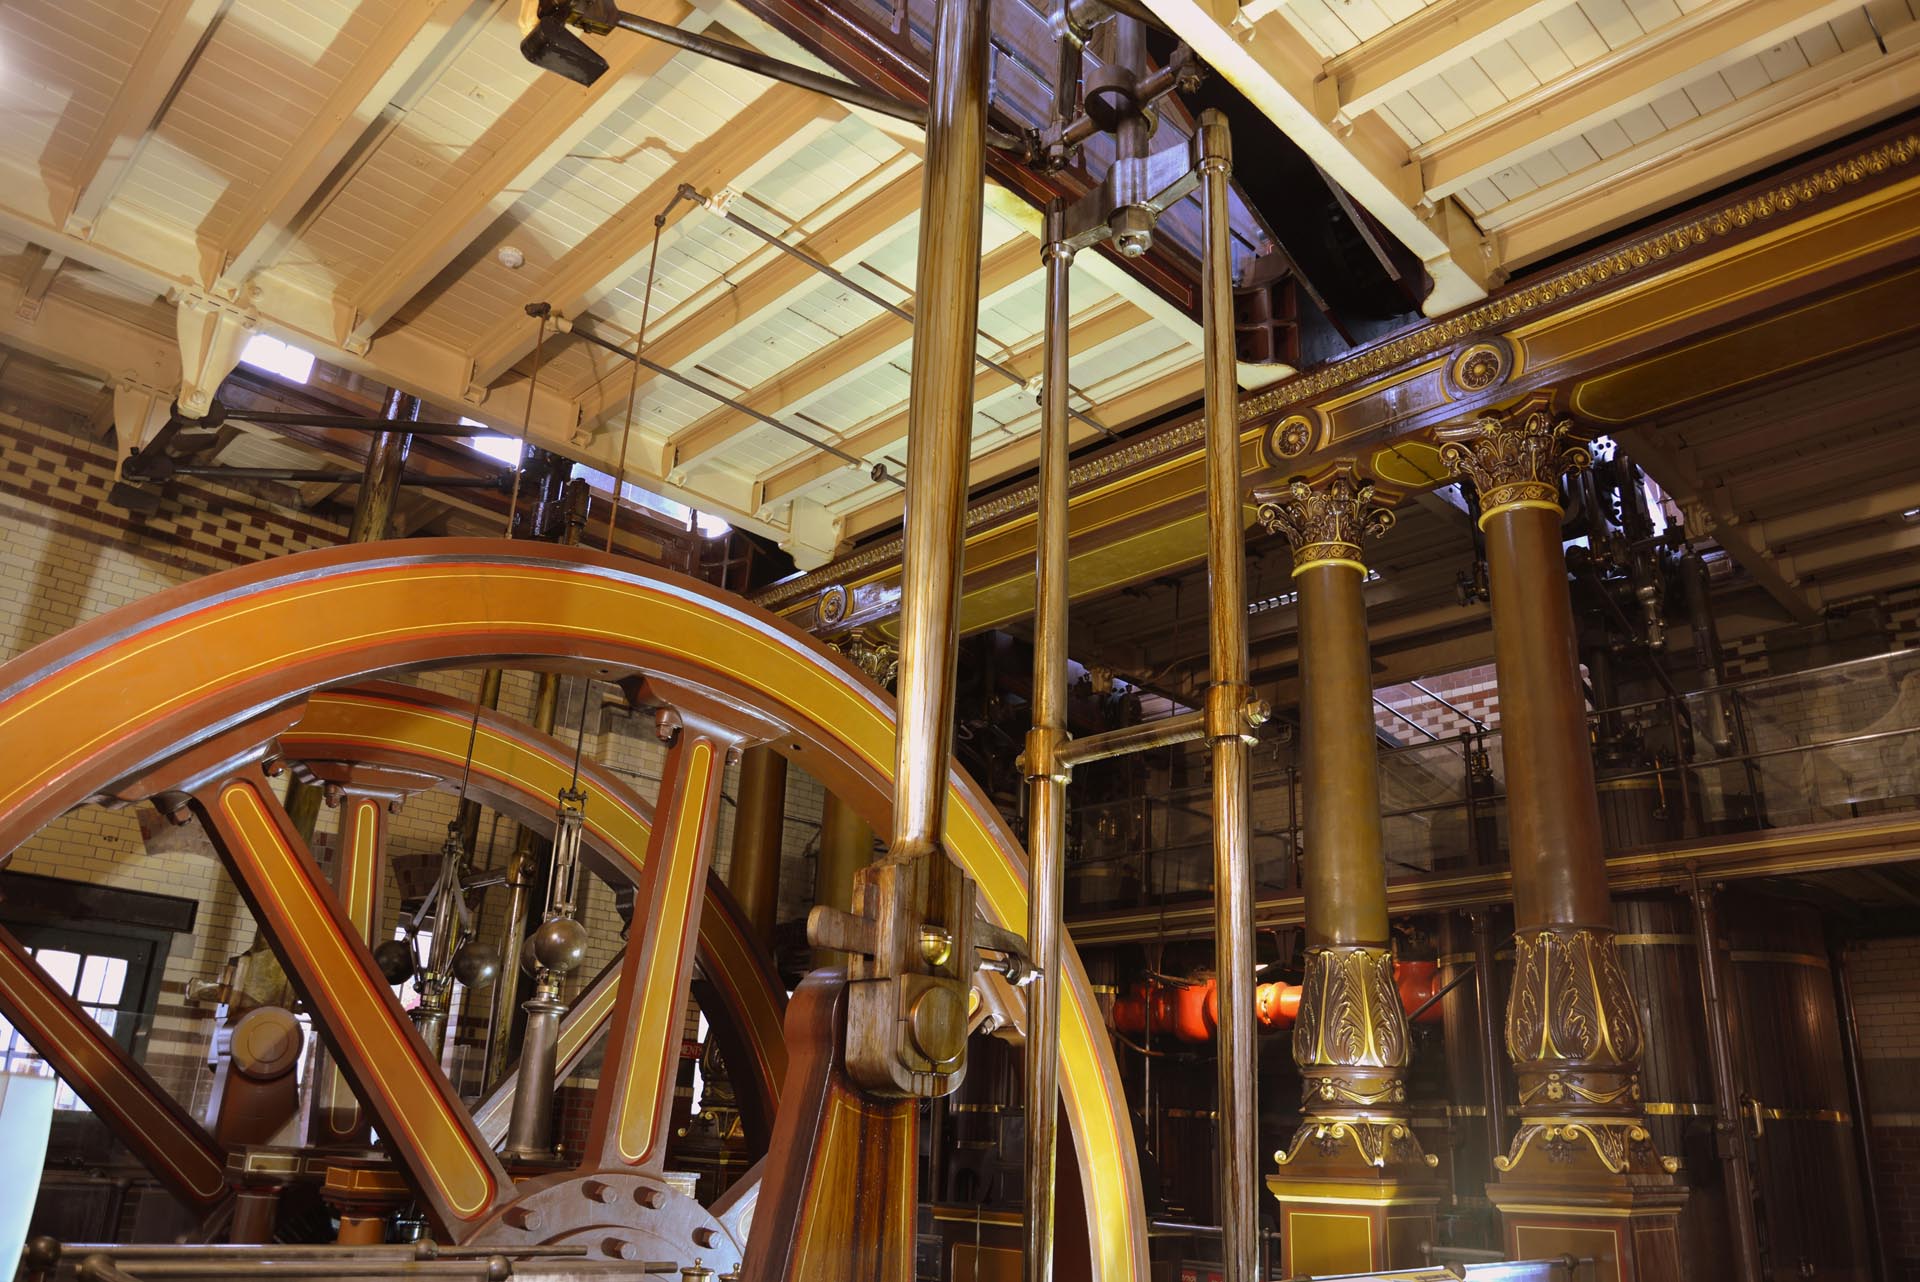 The beam engines at Abbey Pumping Station